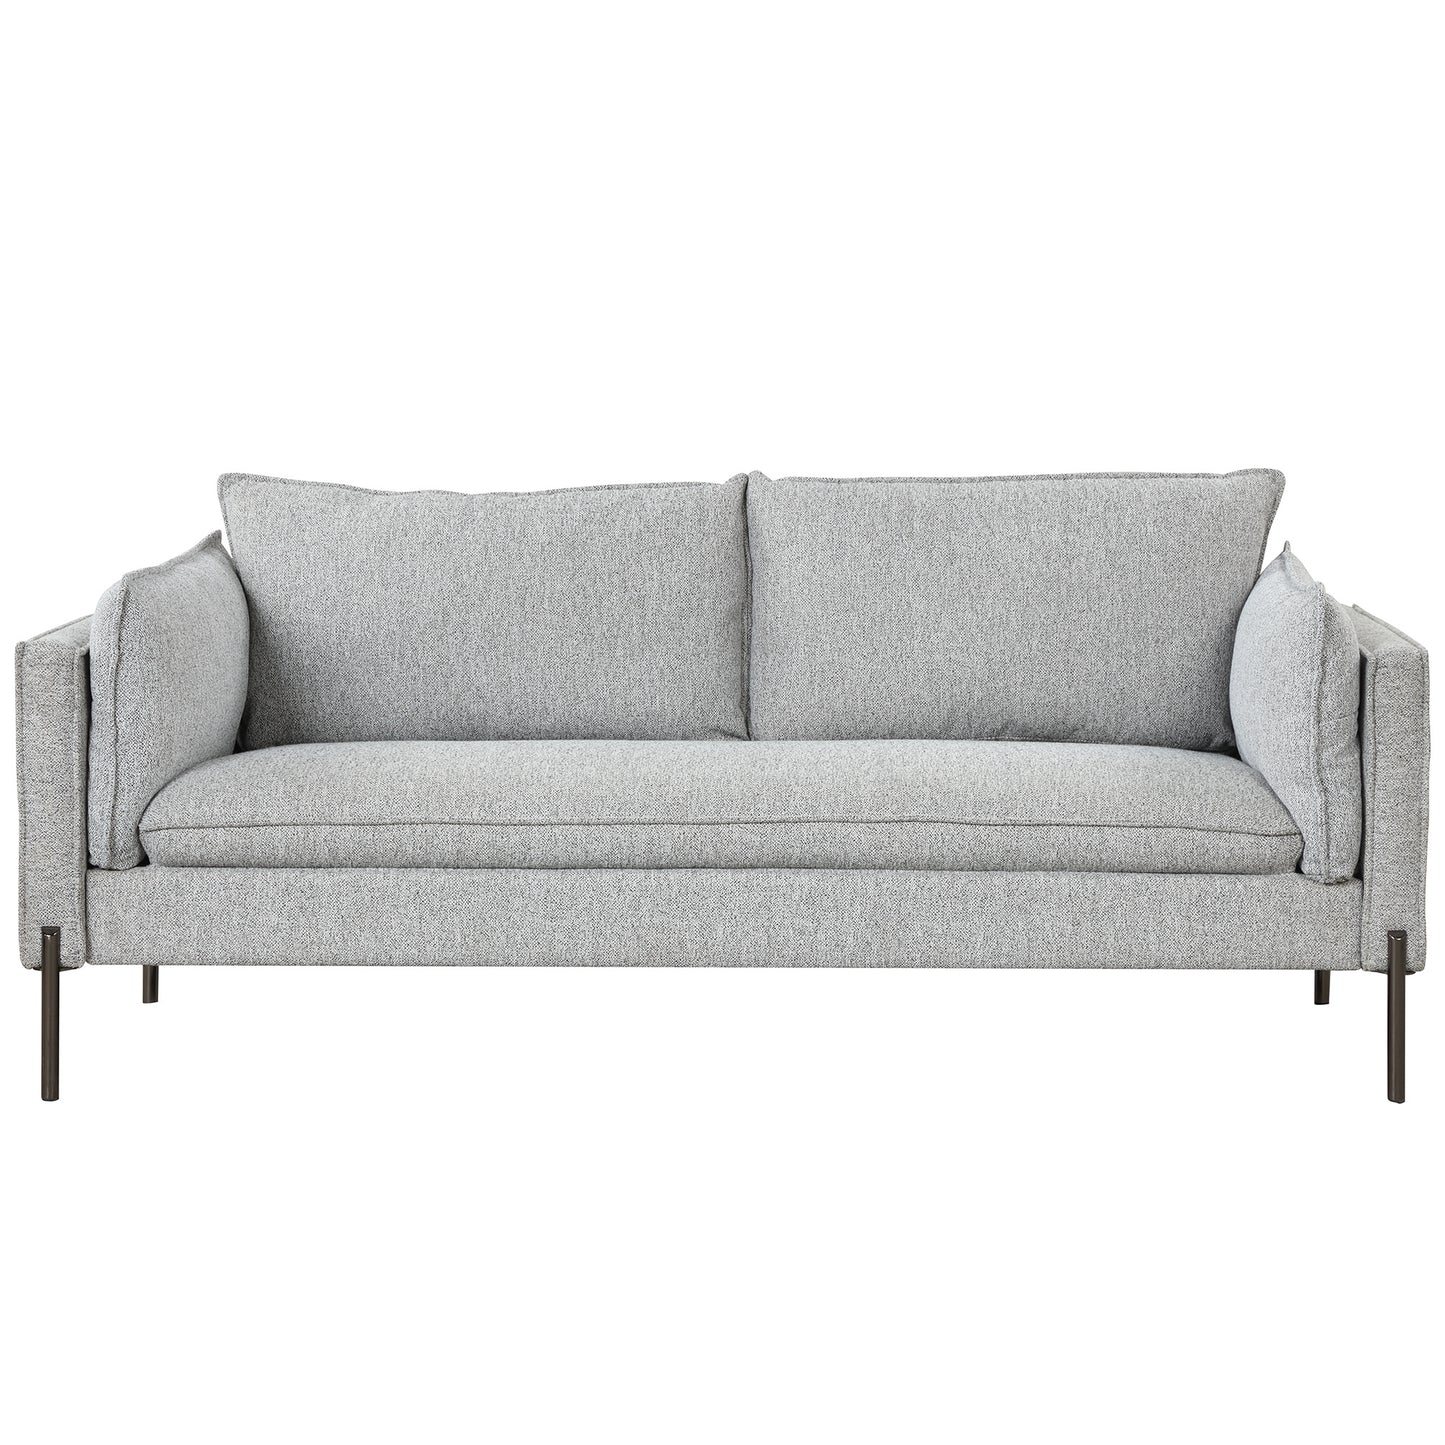 Modern Linen Fabric Upholstered 2pc set, Loveseat and 3 Seat Couch